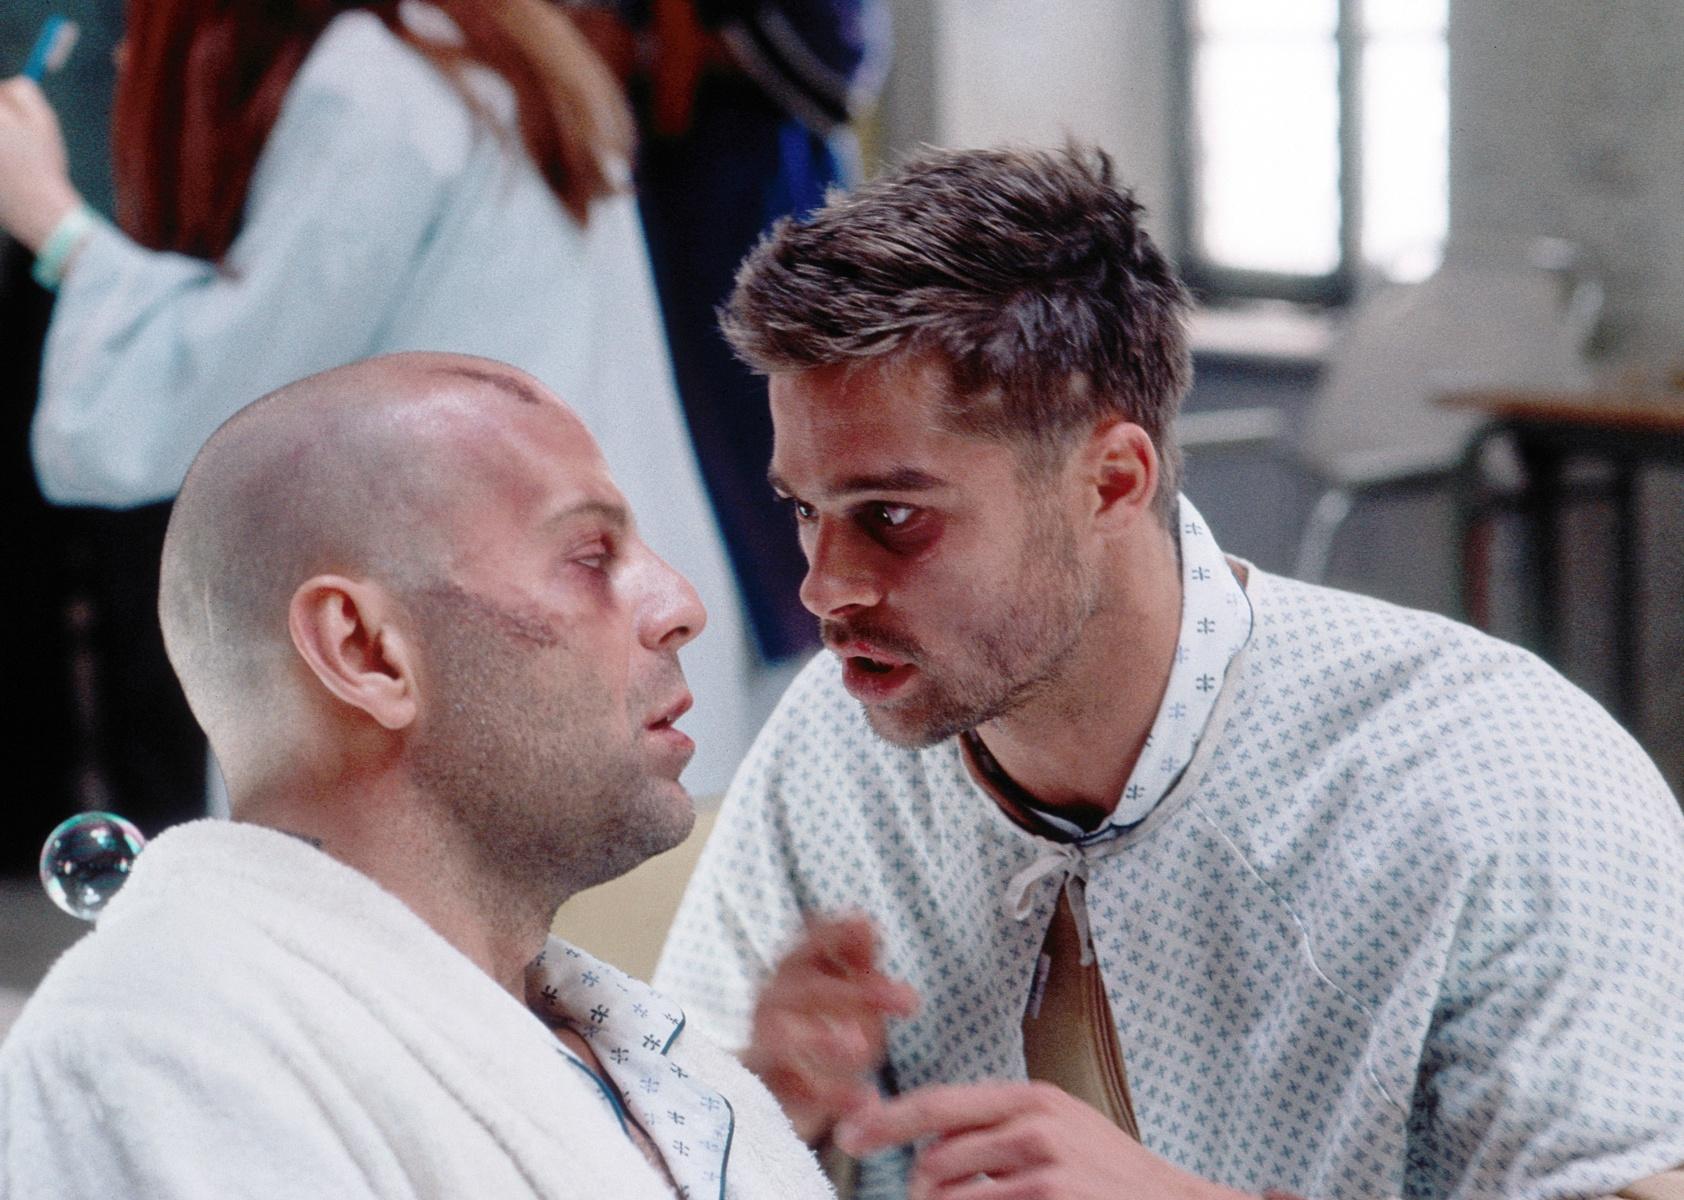 Brad Pitt, in a hospital gown, pleading with Bruce Willis, in a robe.